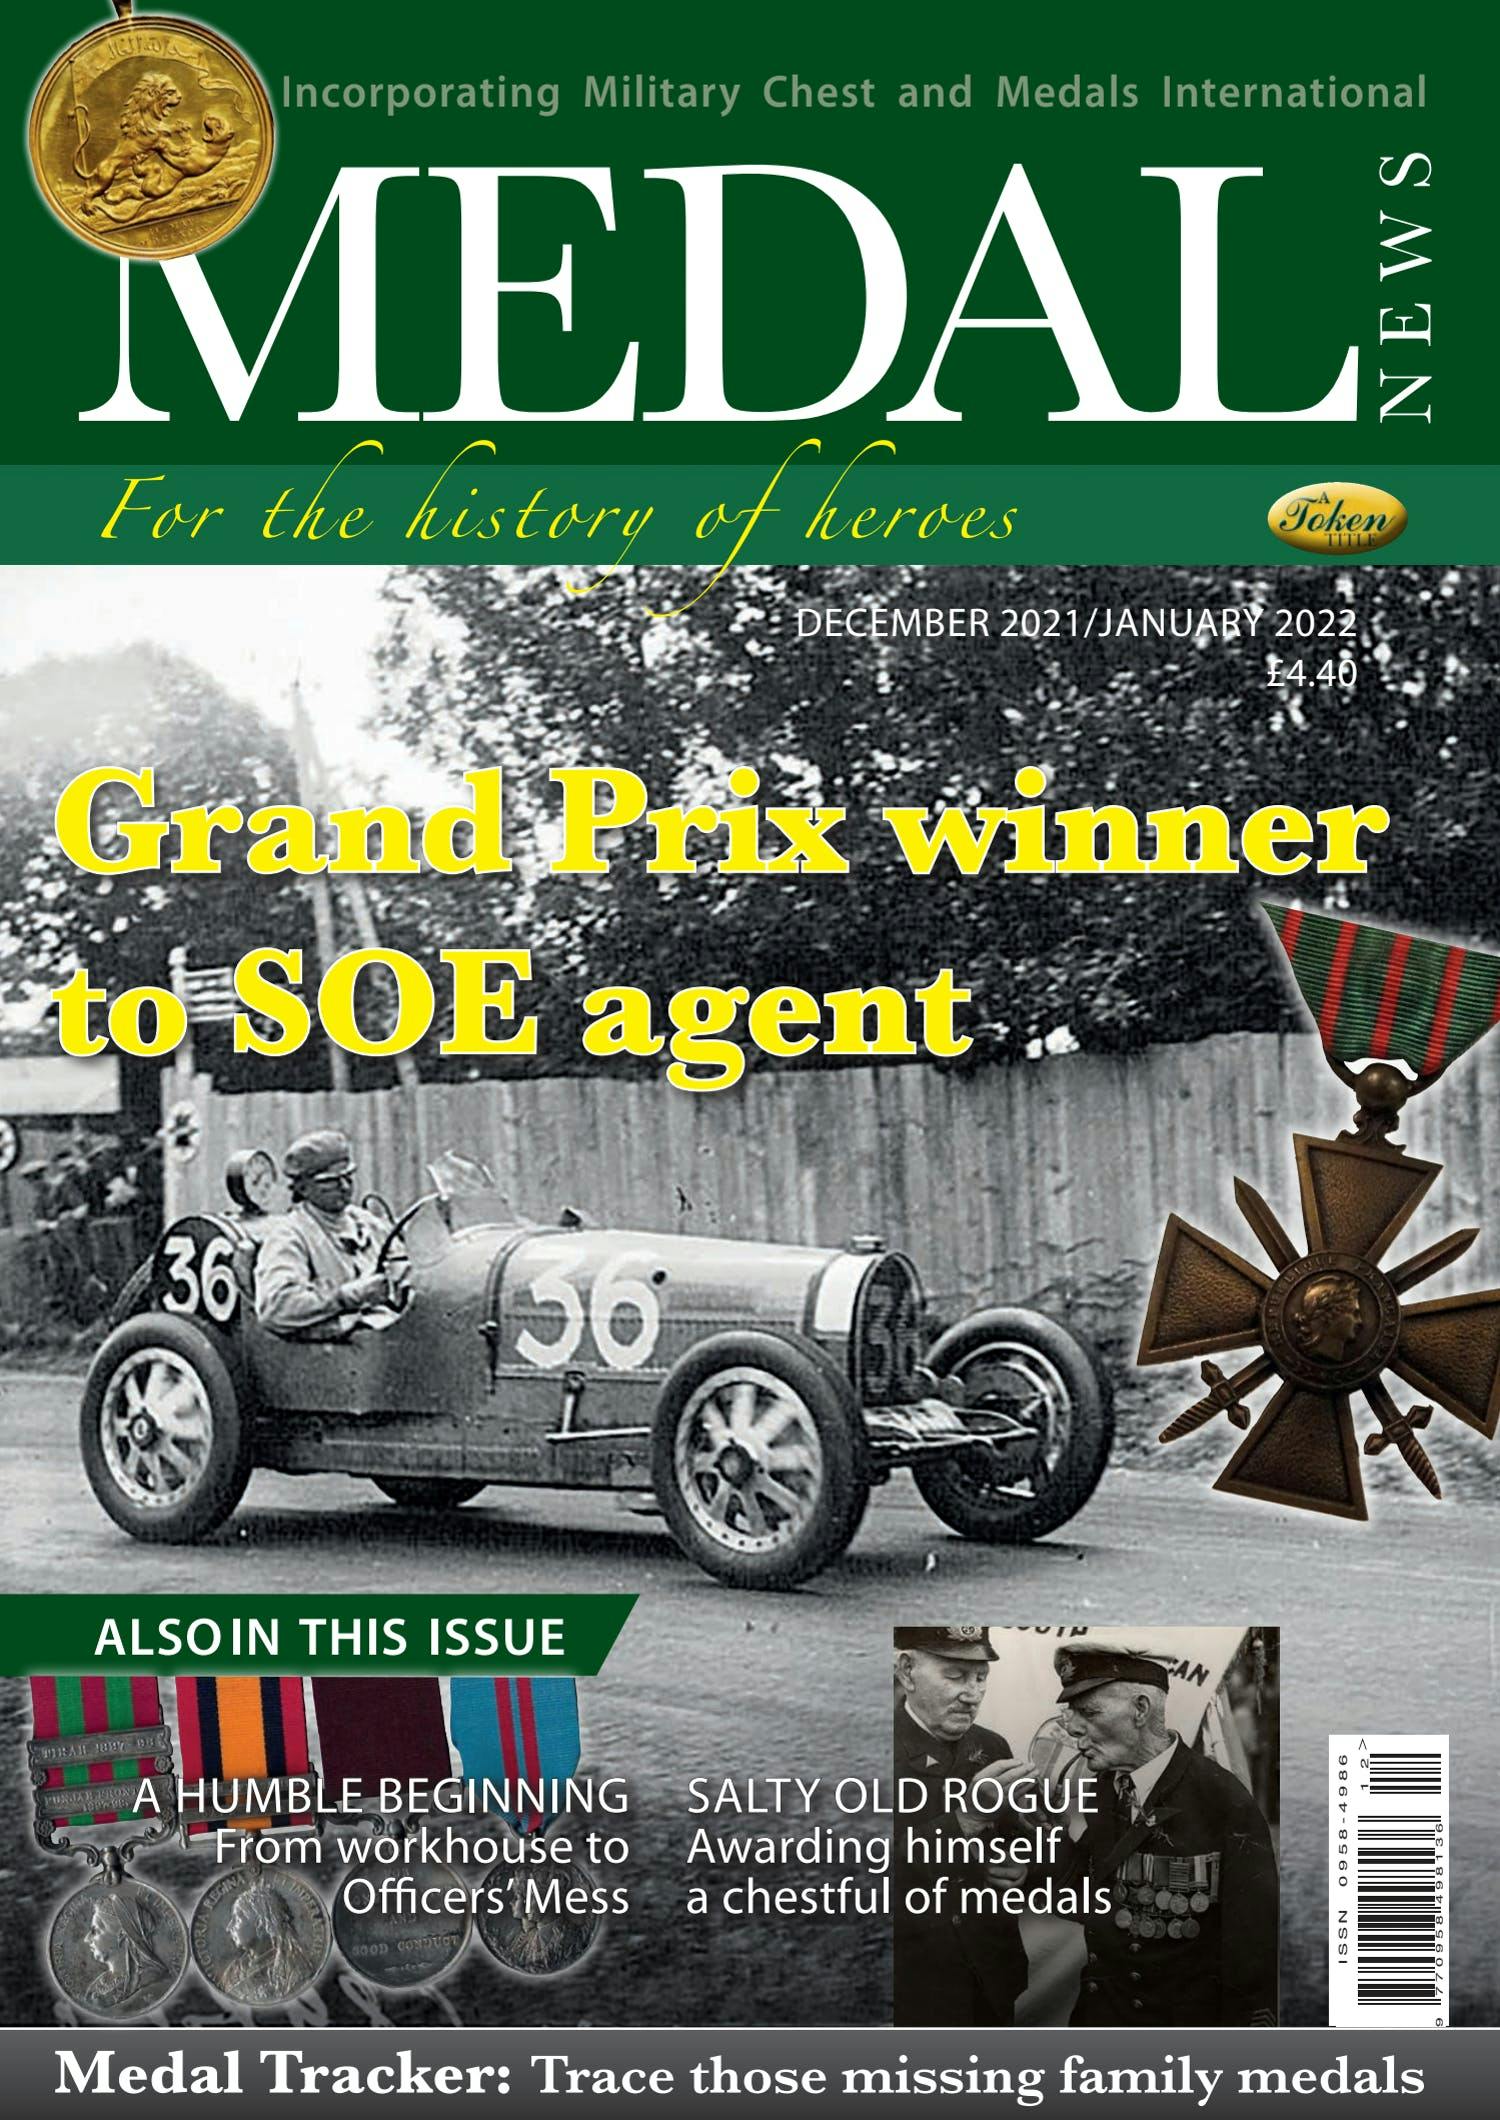 The front cover of Medal News, Volume 60, Number 1, January 2022